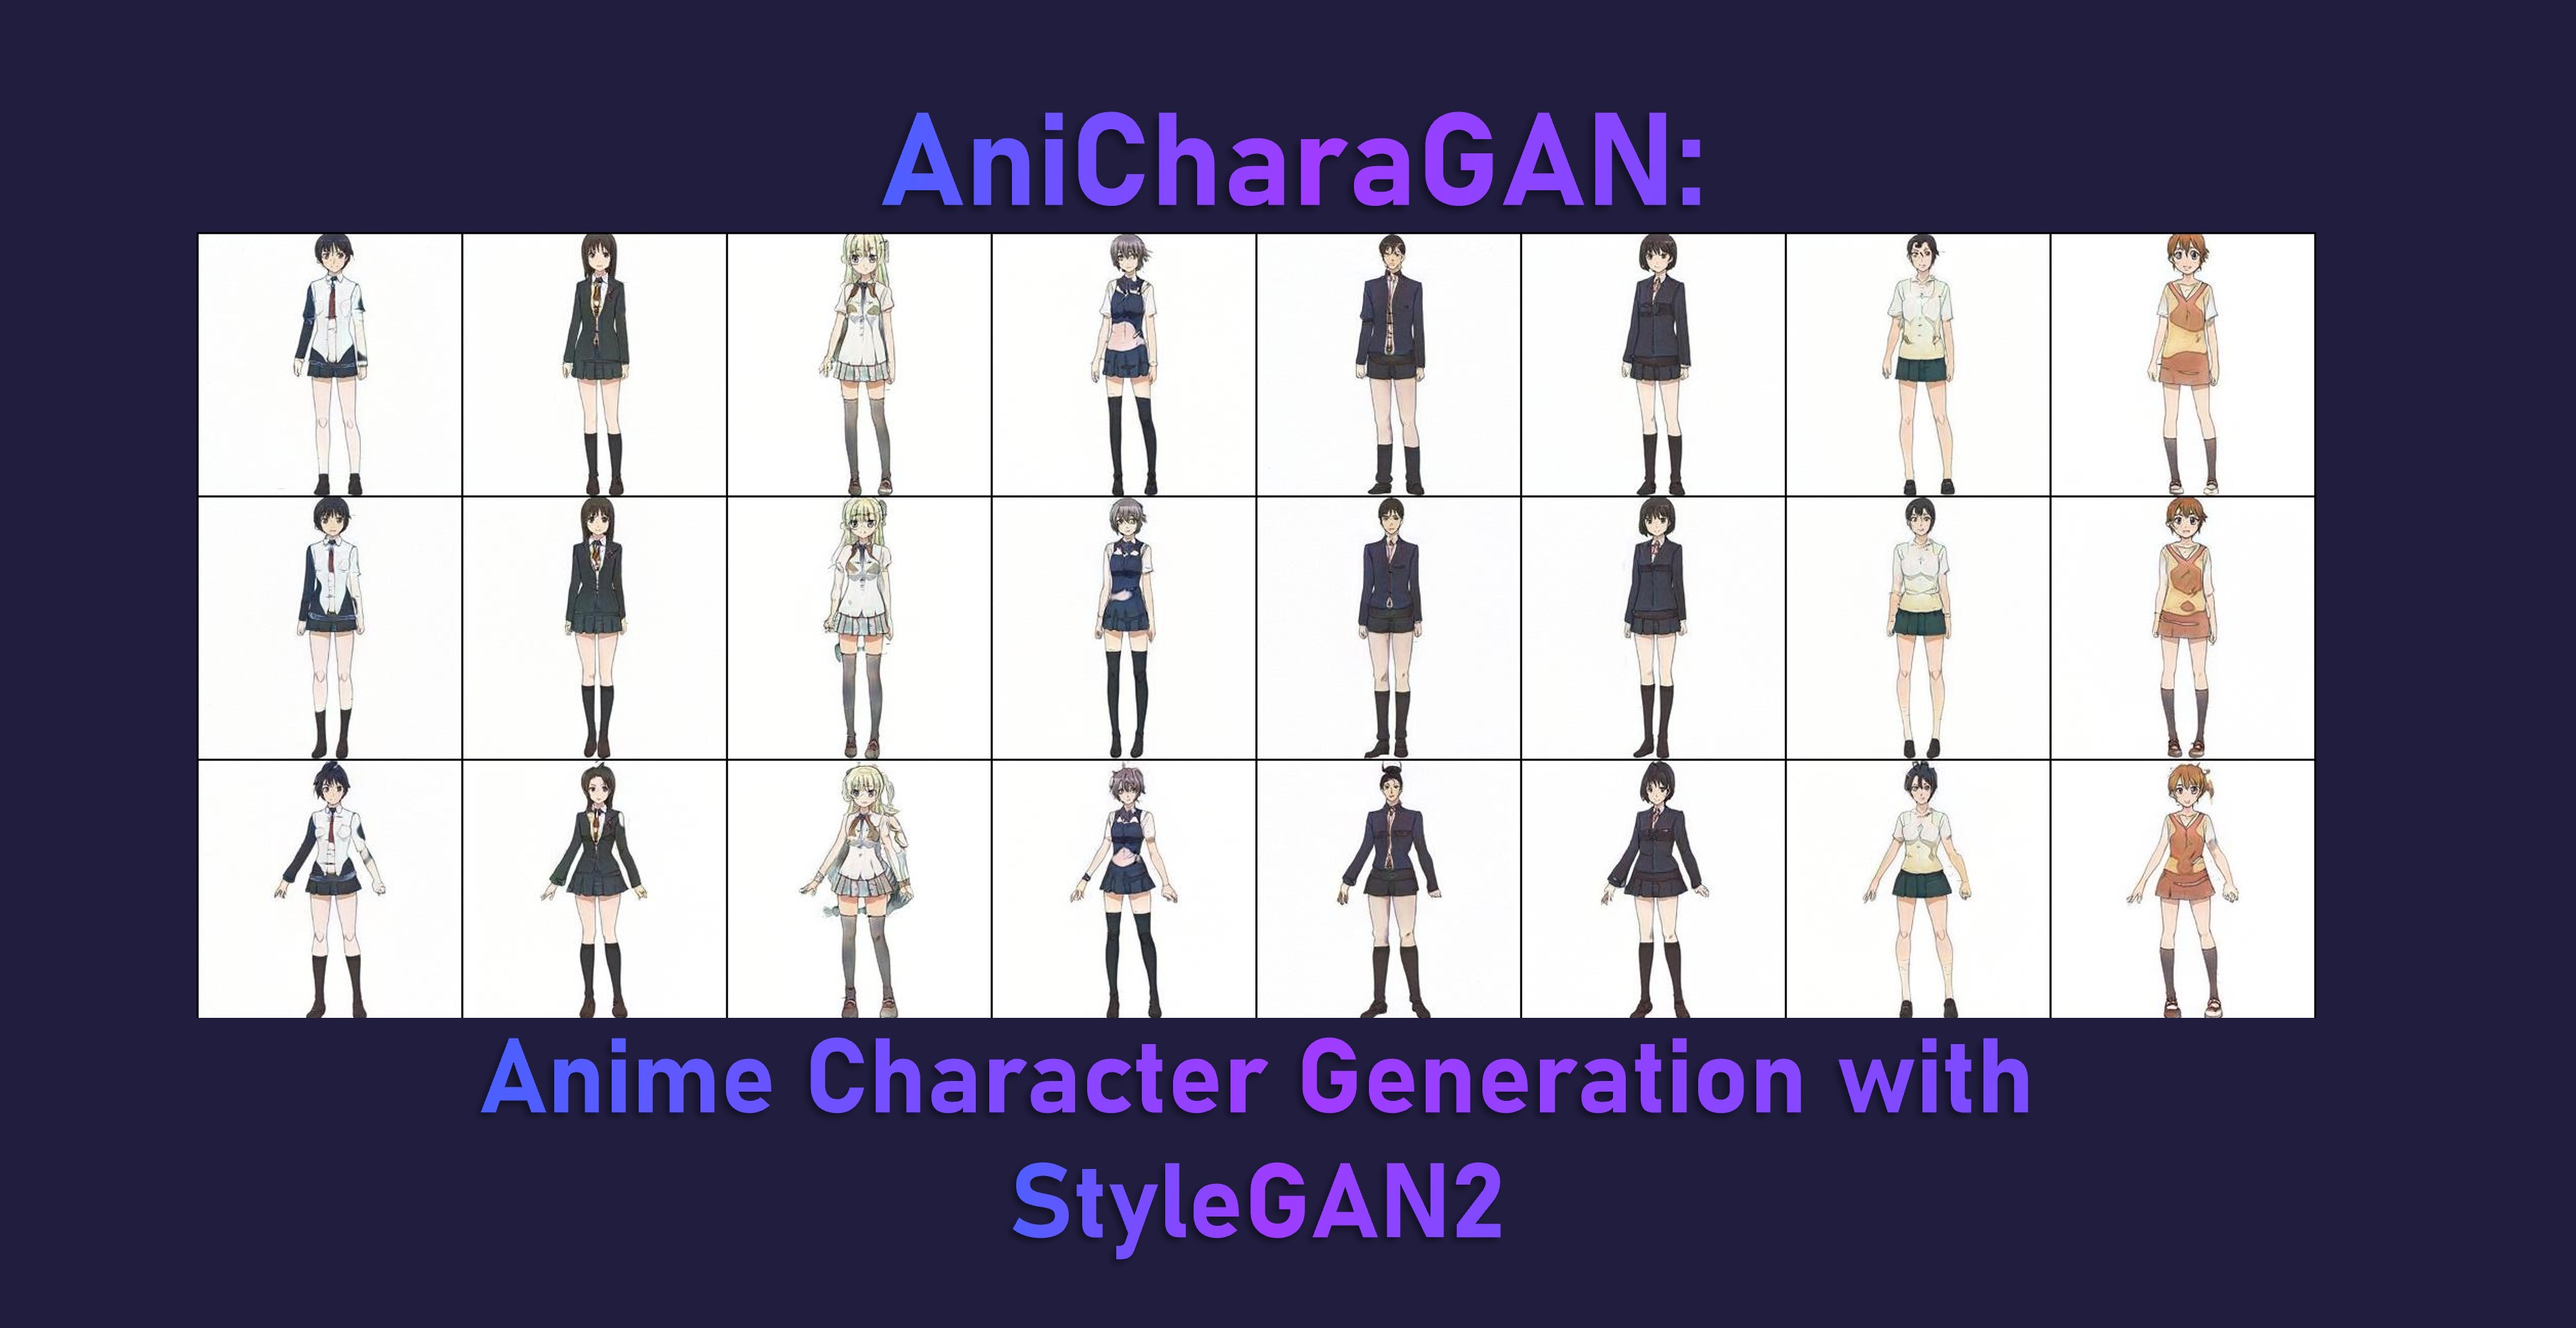 AniCharaGAN - Anime Character Generation with StyleGAN2